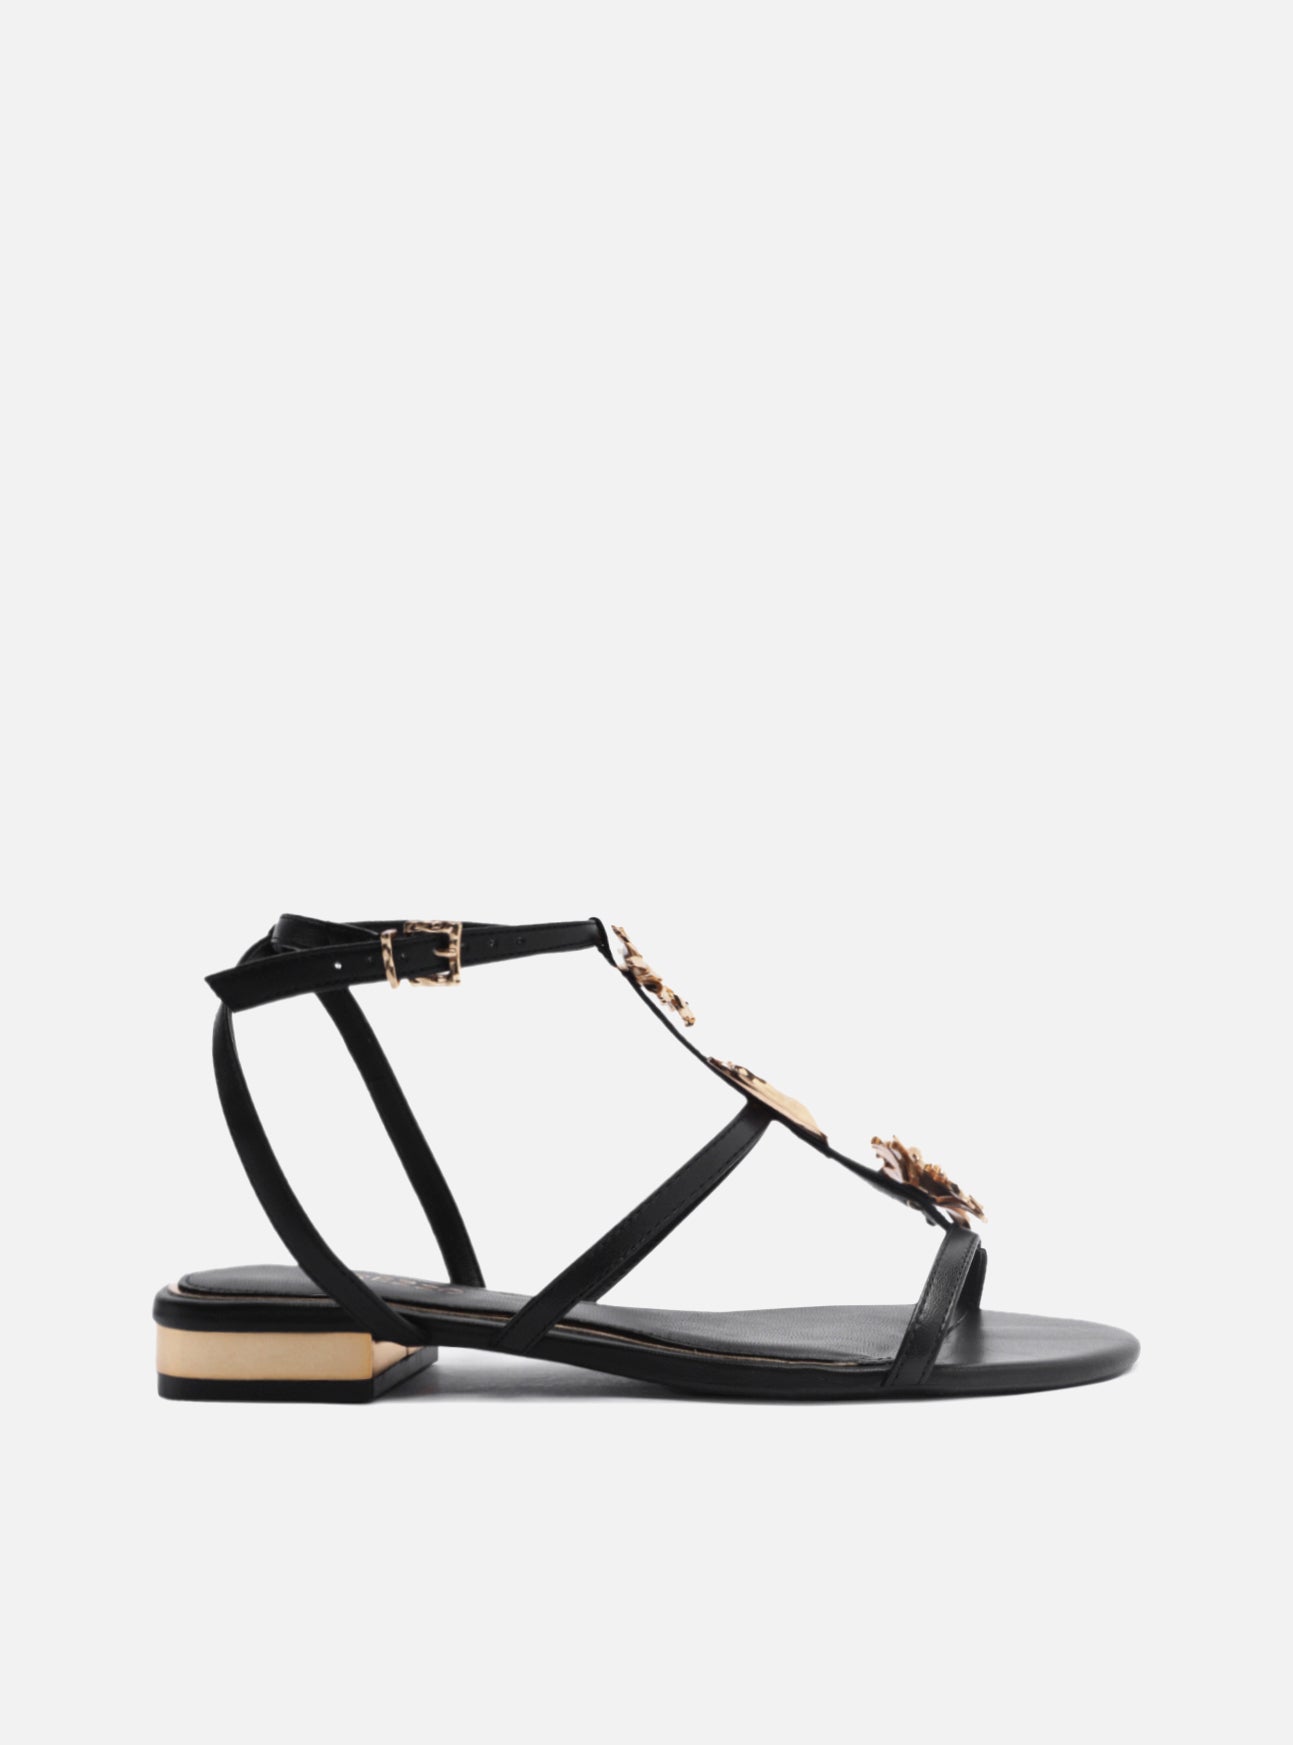 "Black leather sandal with rounded toe. Made in straps, with golden metallic flowers and metallic closure at the ankle. "